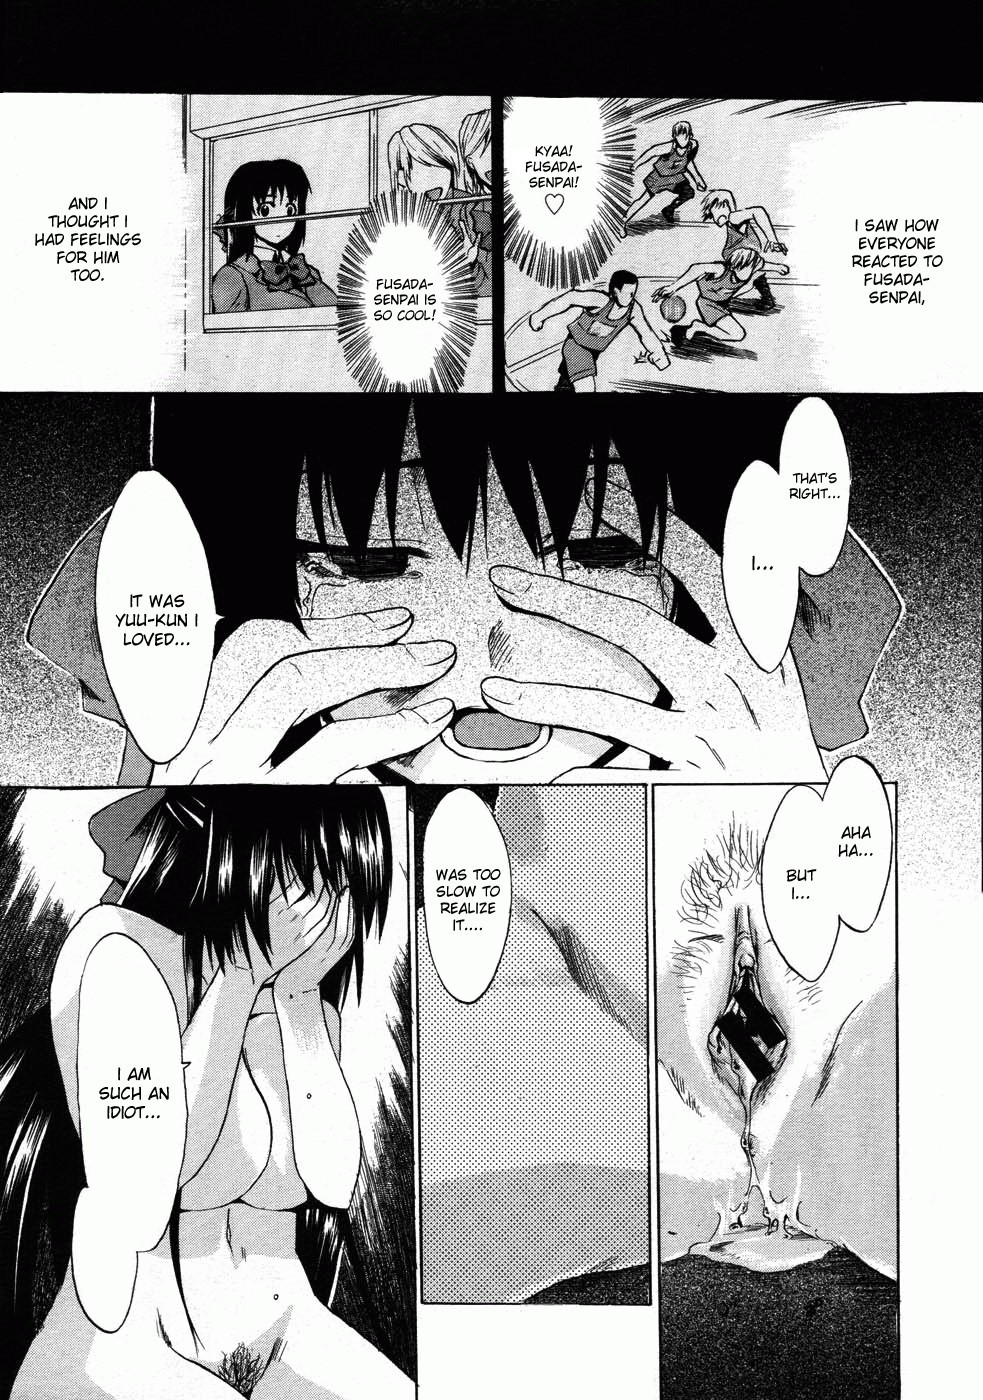 When you let go of my hands 72 hentai manga